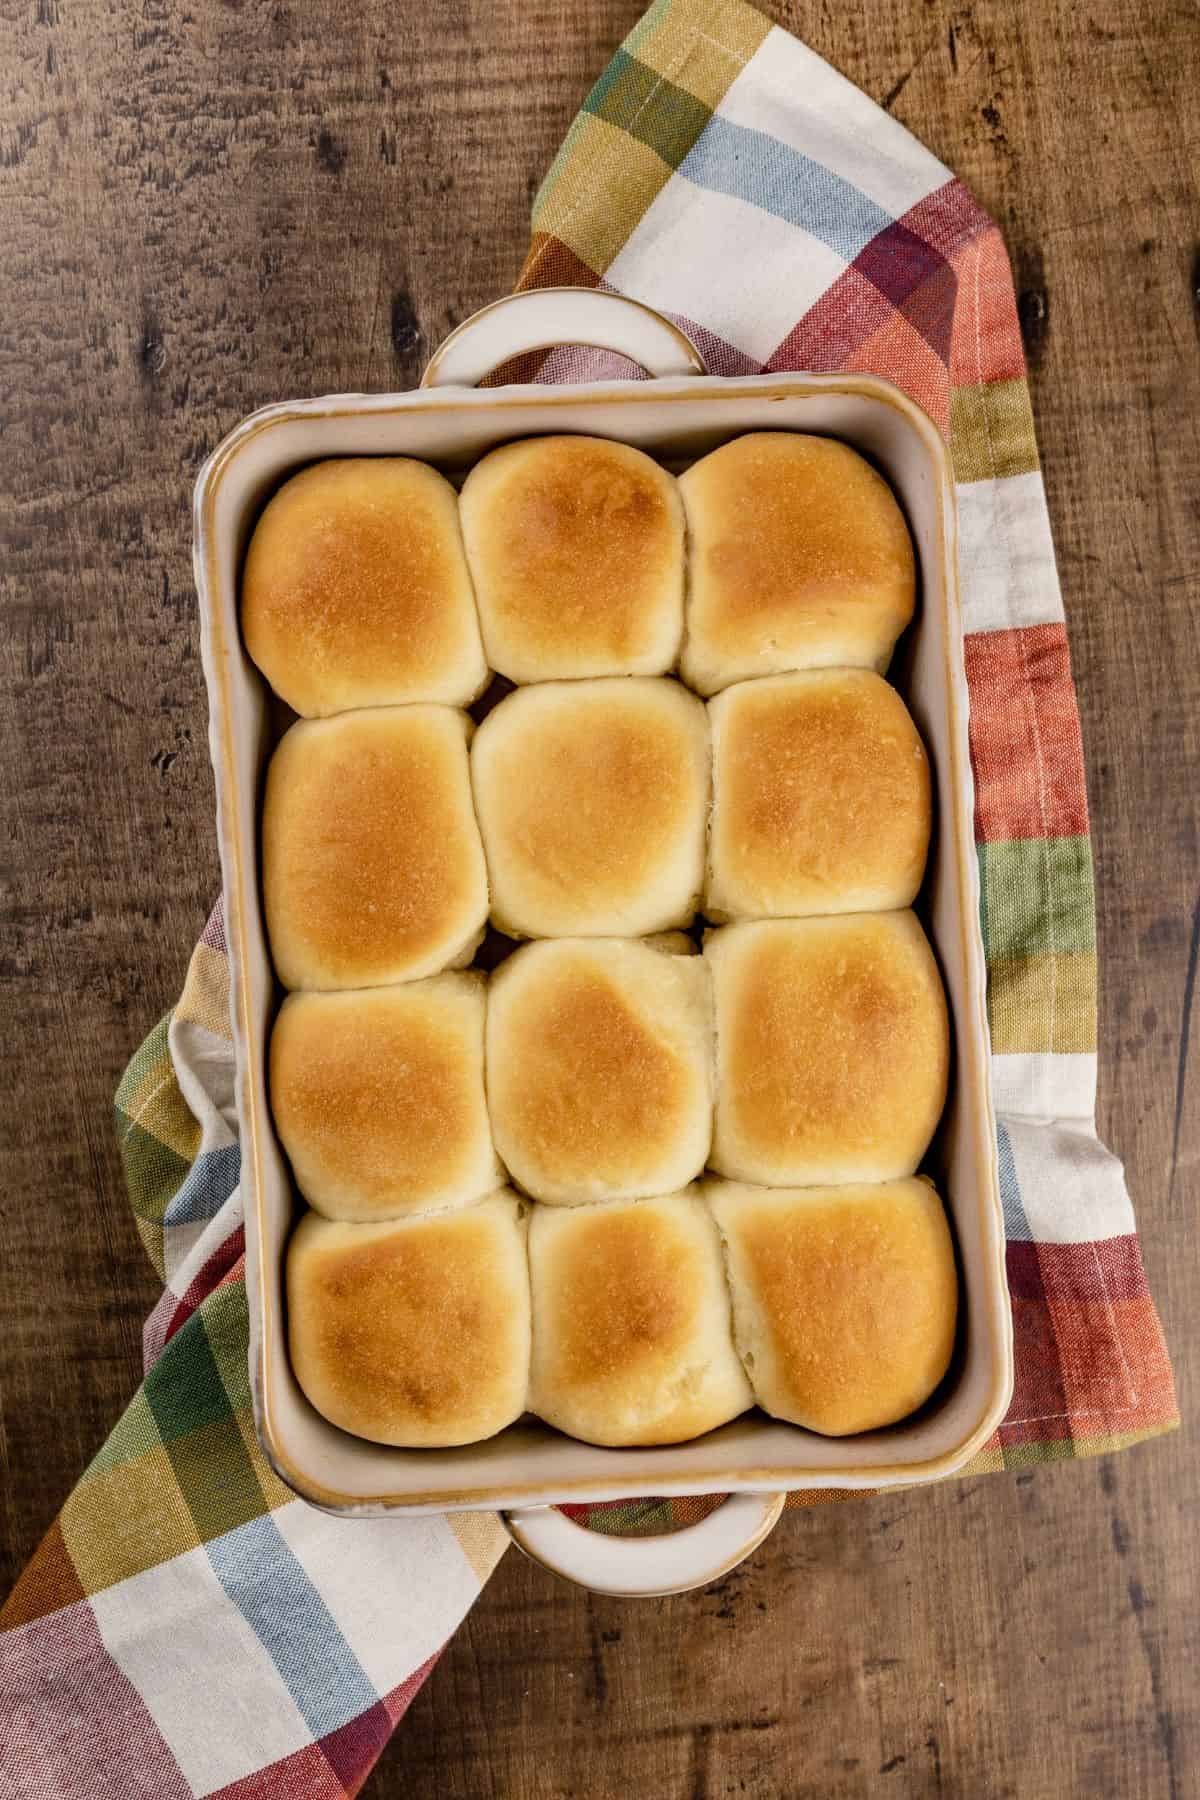 12 baked rolls in a baking dish on top of a kitchen towel on the kitchen wood tabletop.